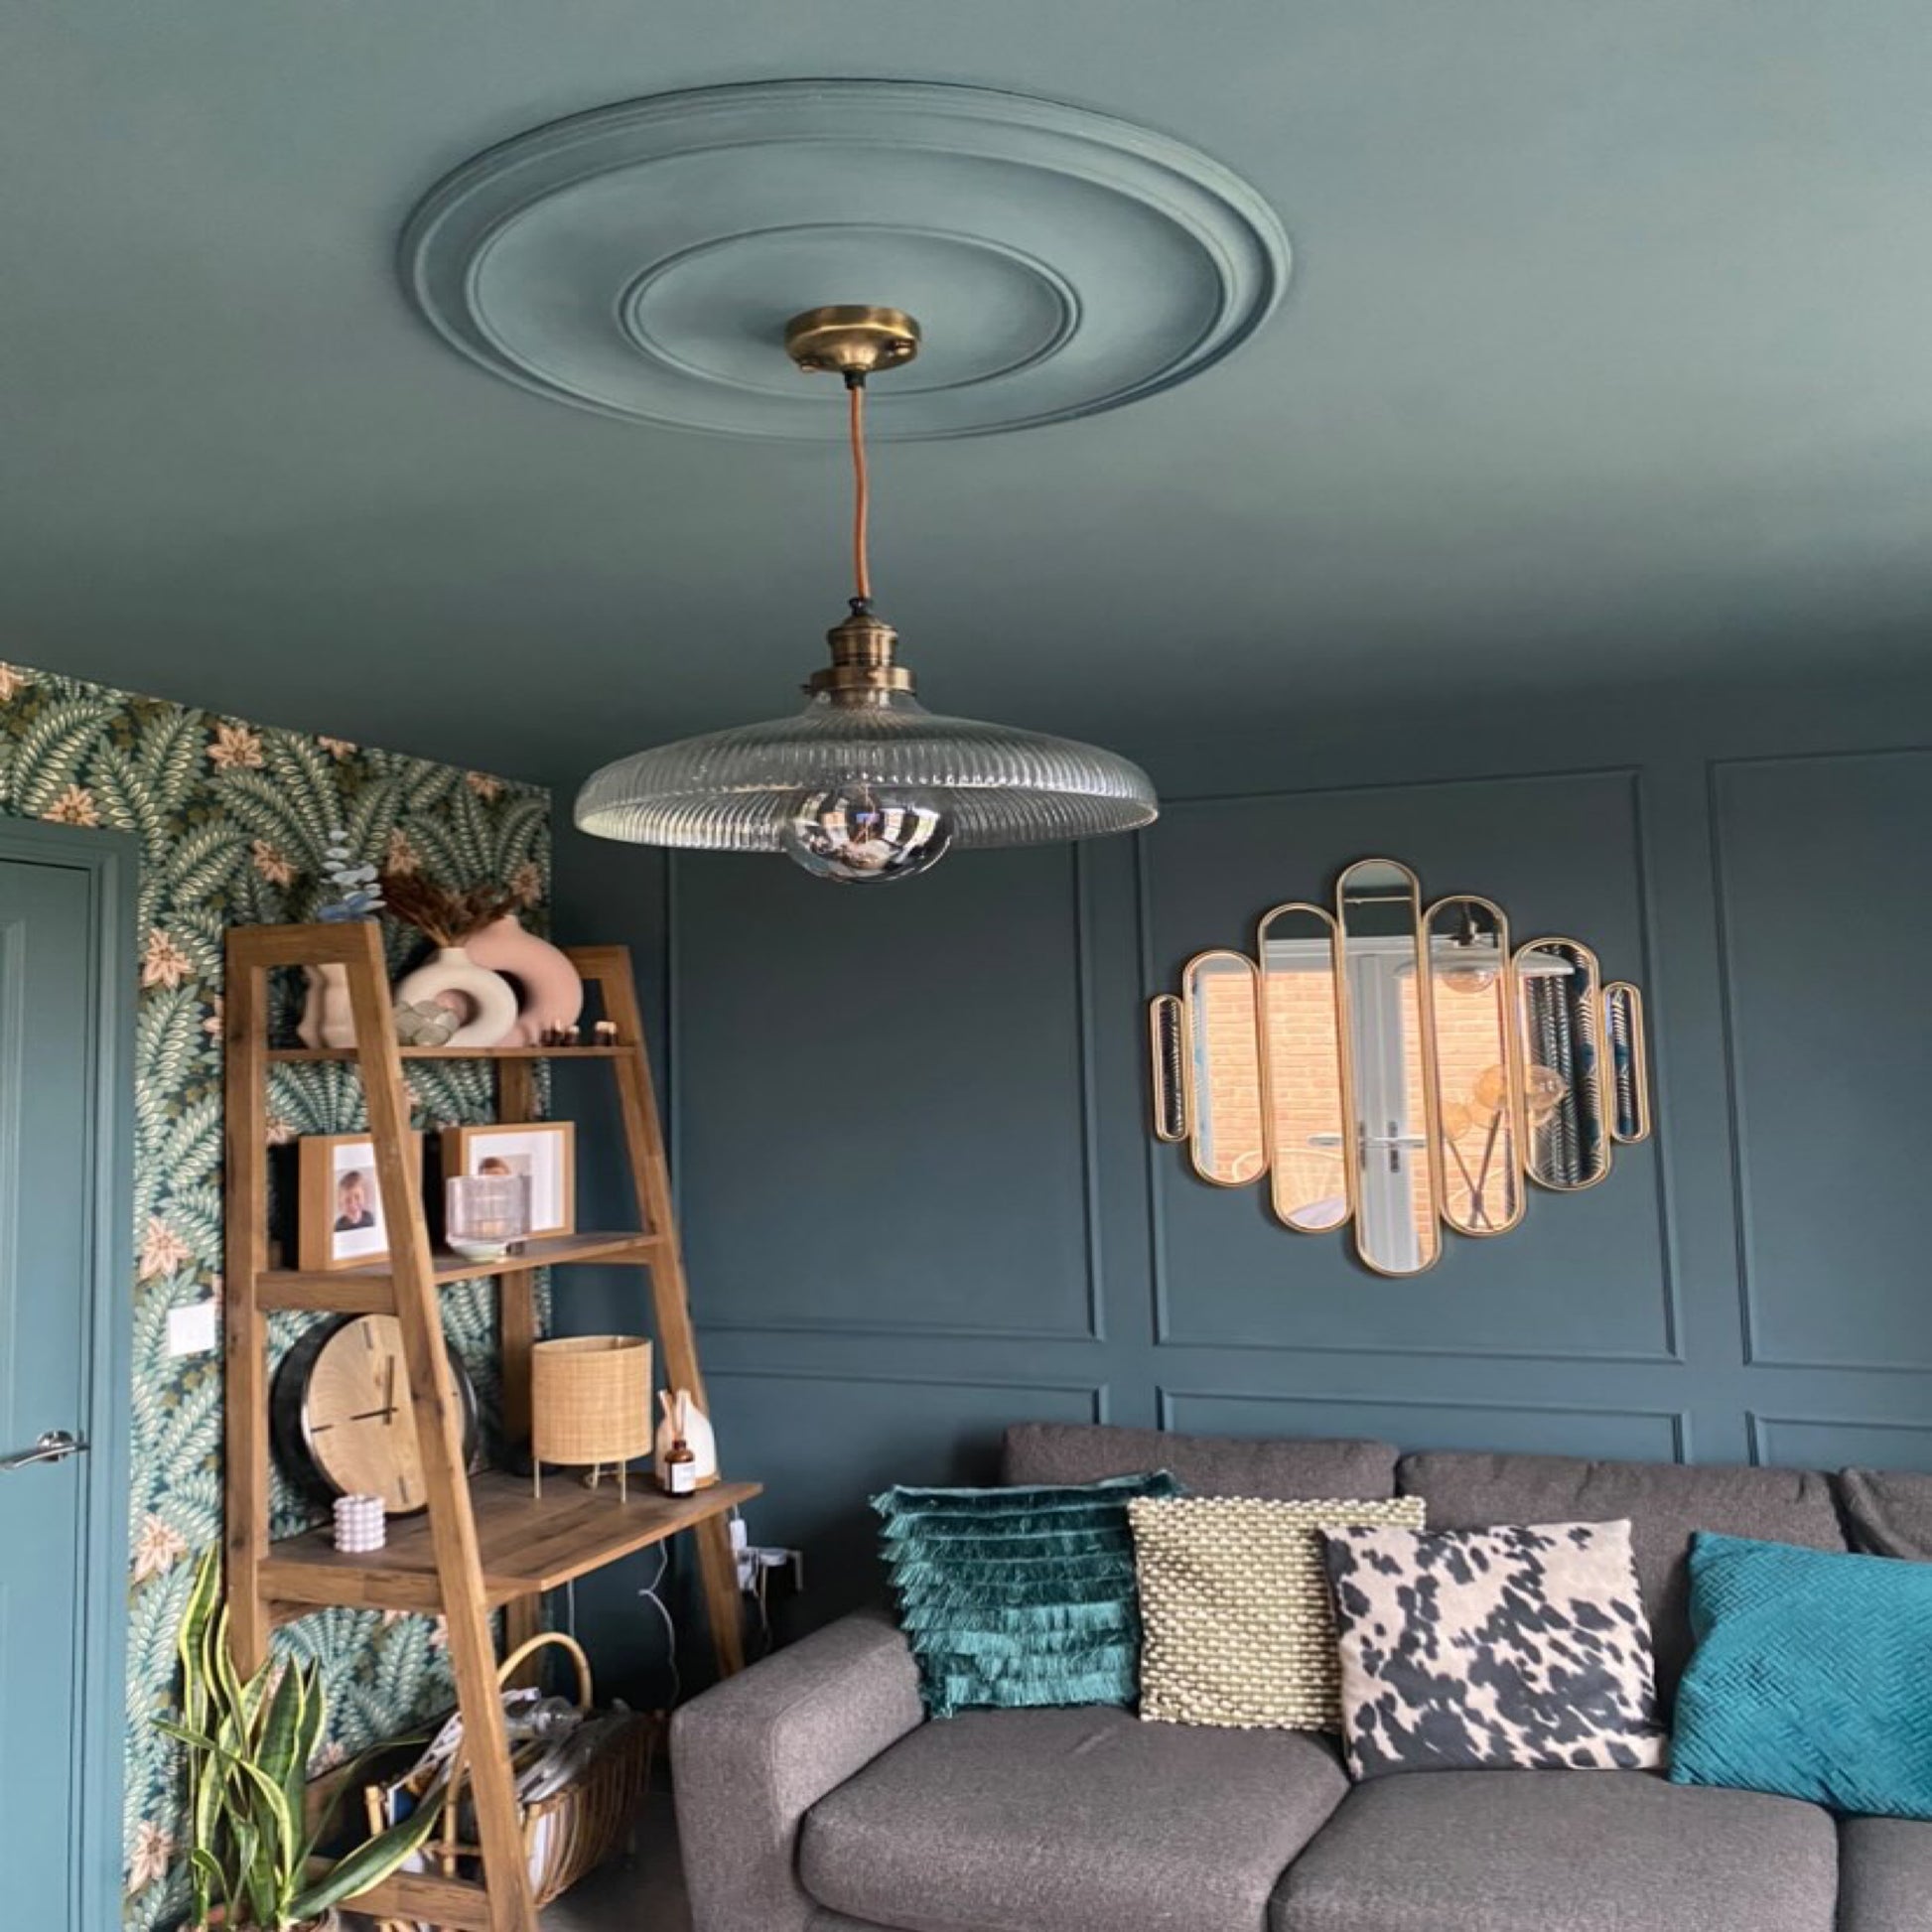 Large Plain Spun Plaster Ceiling Rose in quirky room